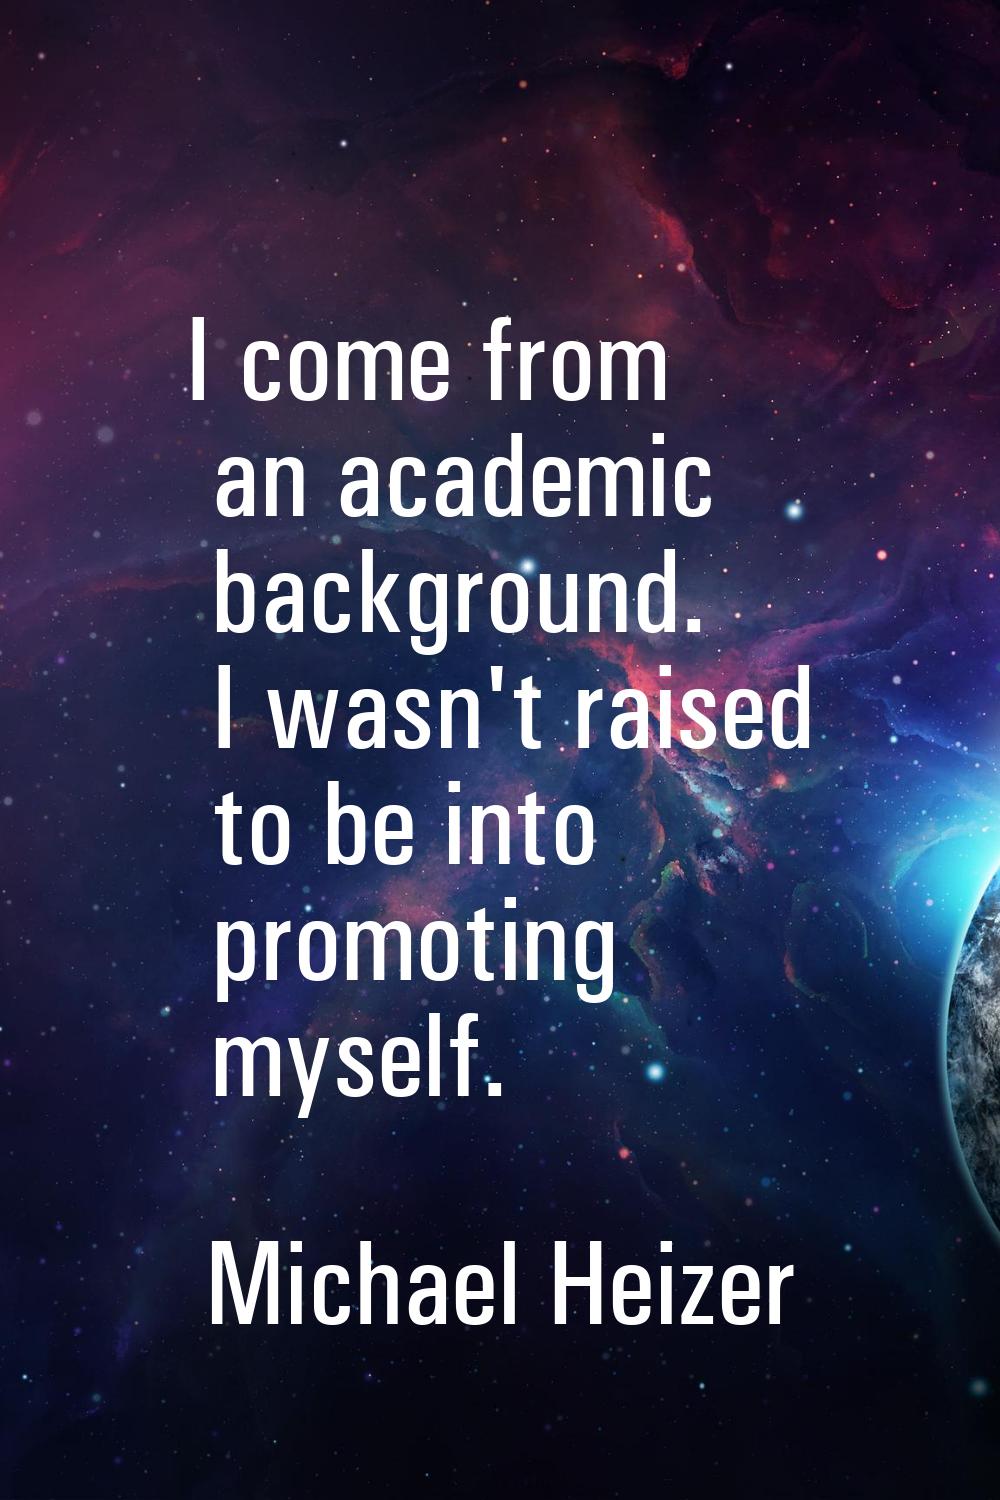 I come from an academic background. I wasn't raised to be into promoting myself.